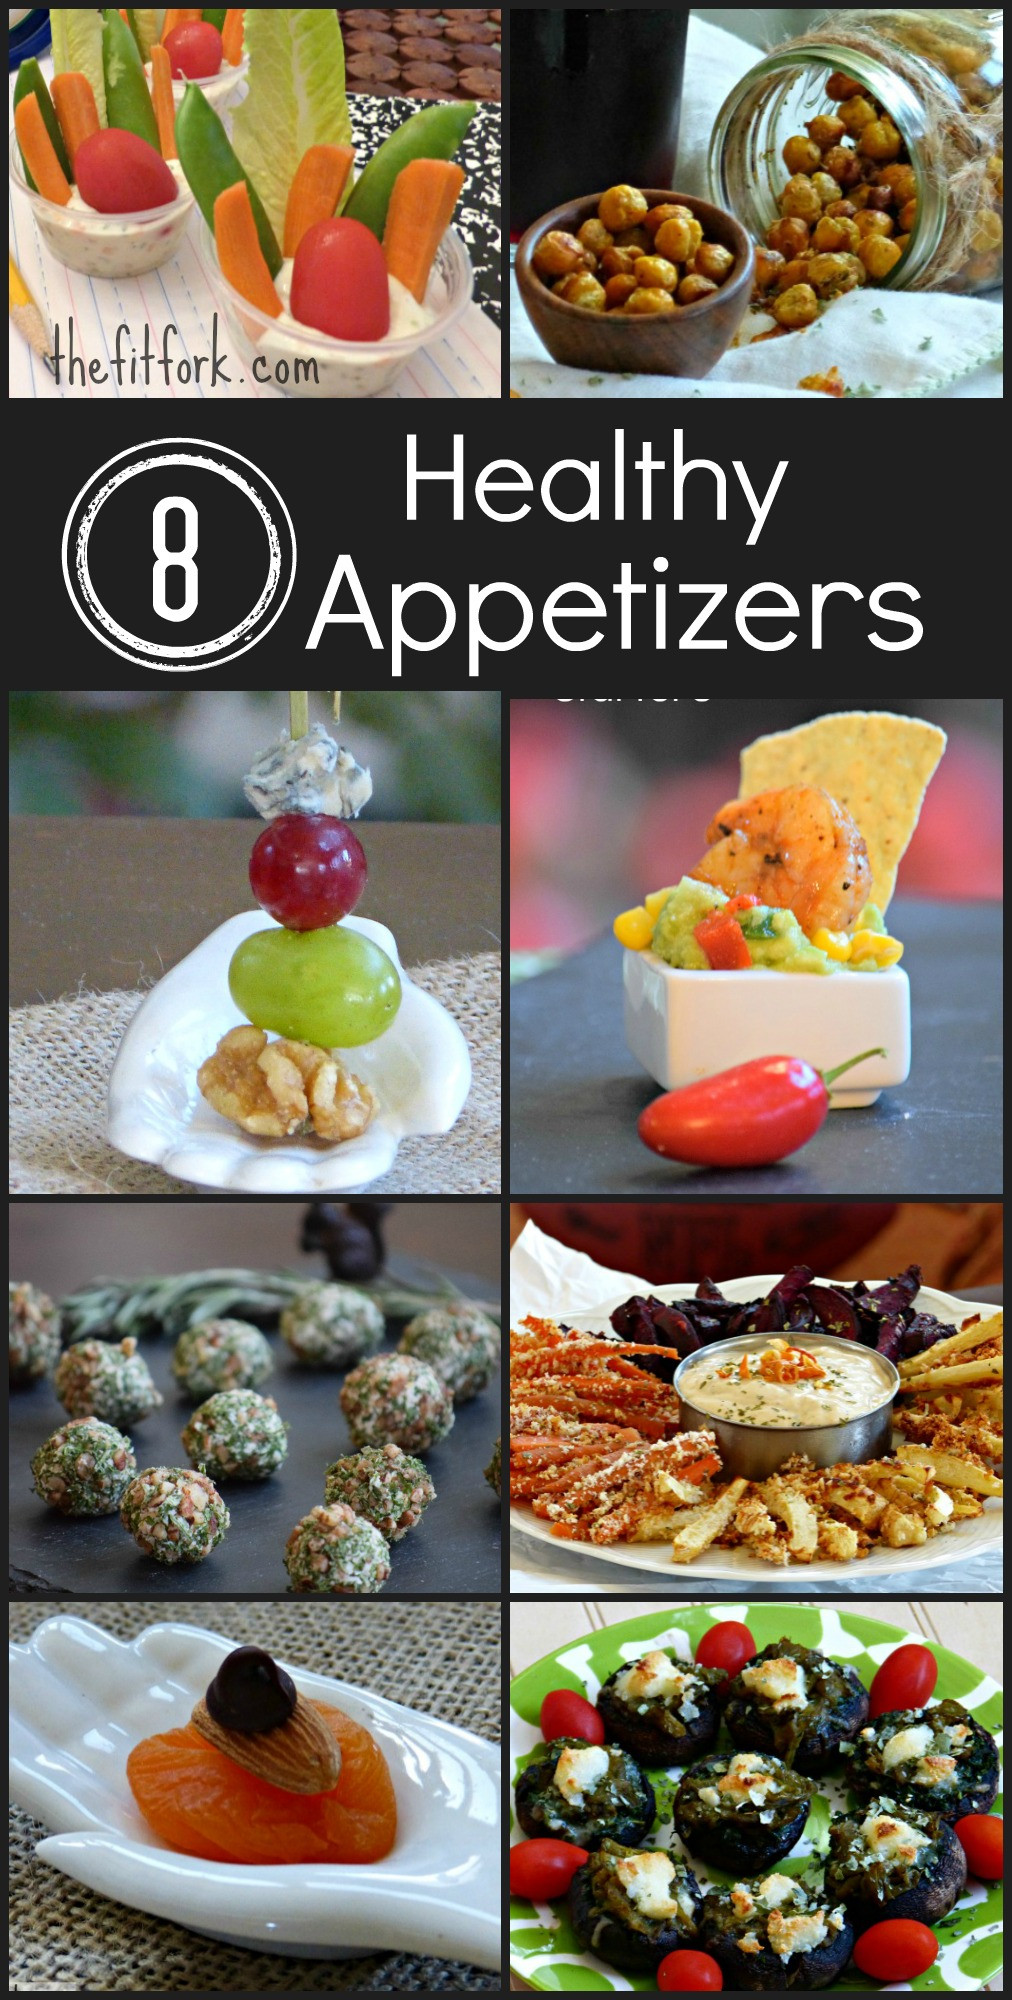 Appetizers For New Years Eve Party
 Lettuce Party 8 Healthy Appetizers for New Year’s Eve